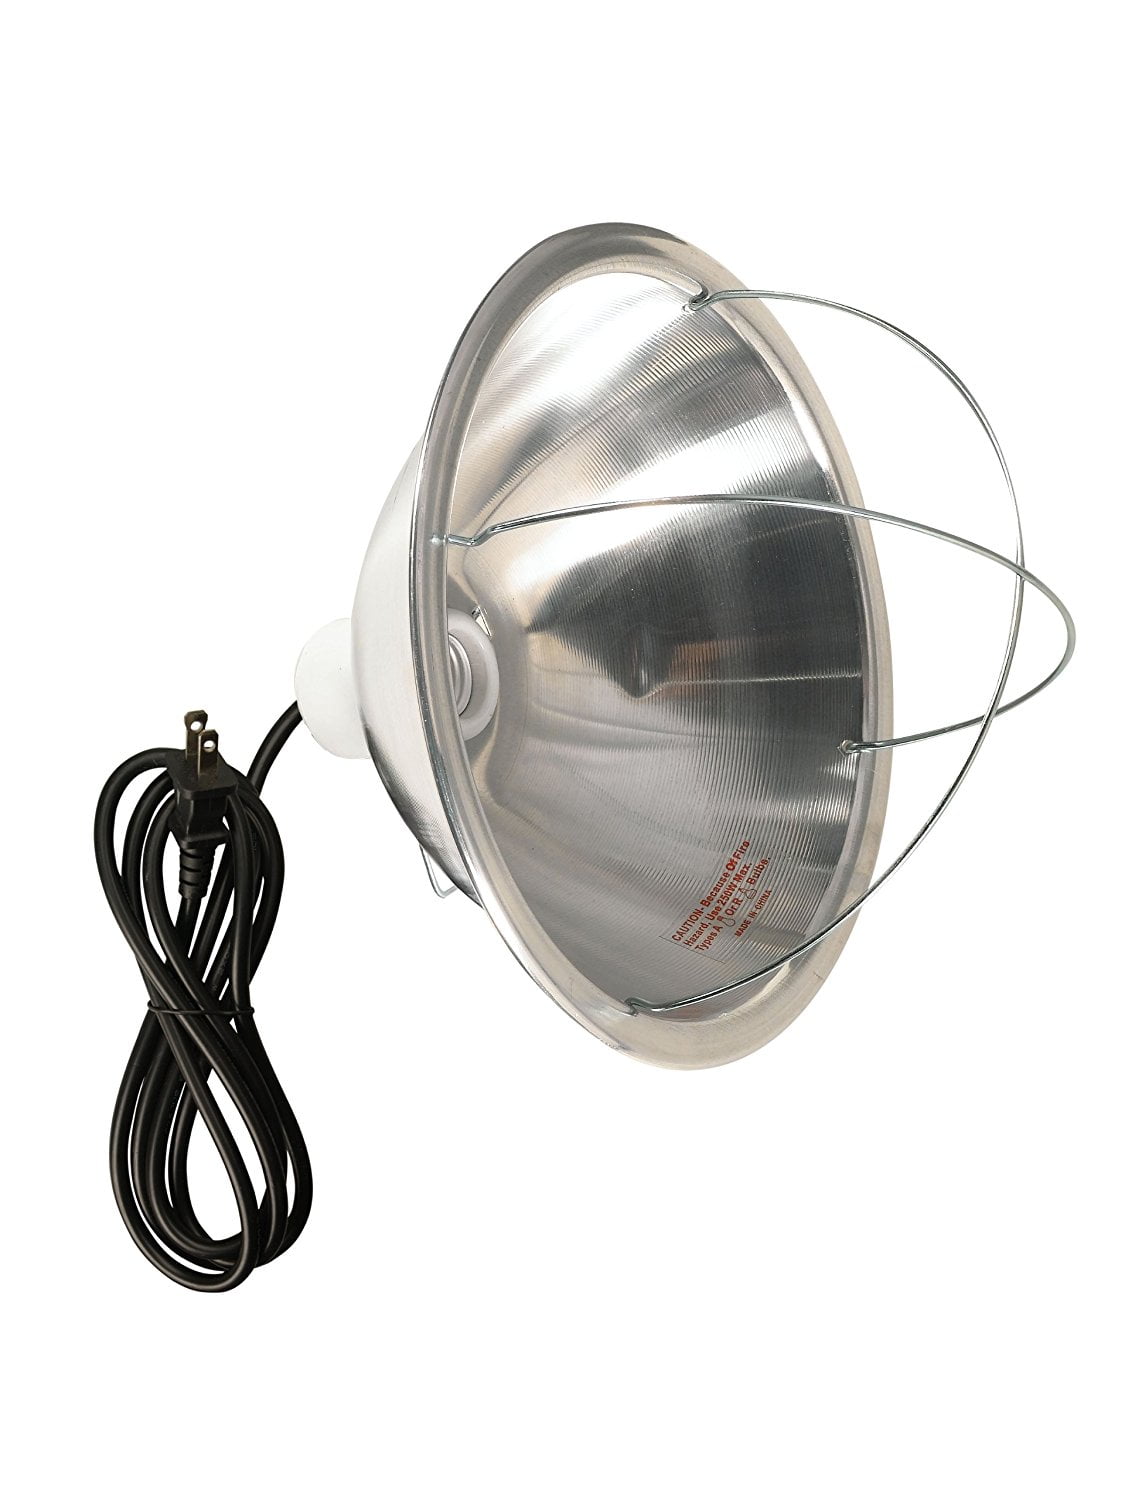 10.5-Inch Woods 0165 18/2-Gauge SJTW Brooder Lamp with Bulb Guard and Reflector